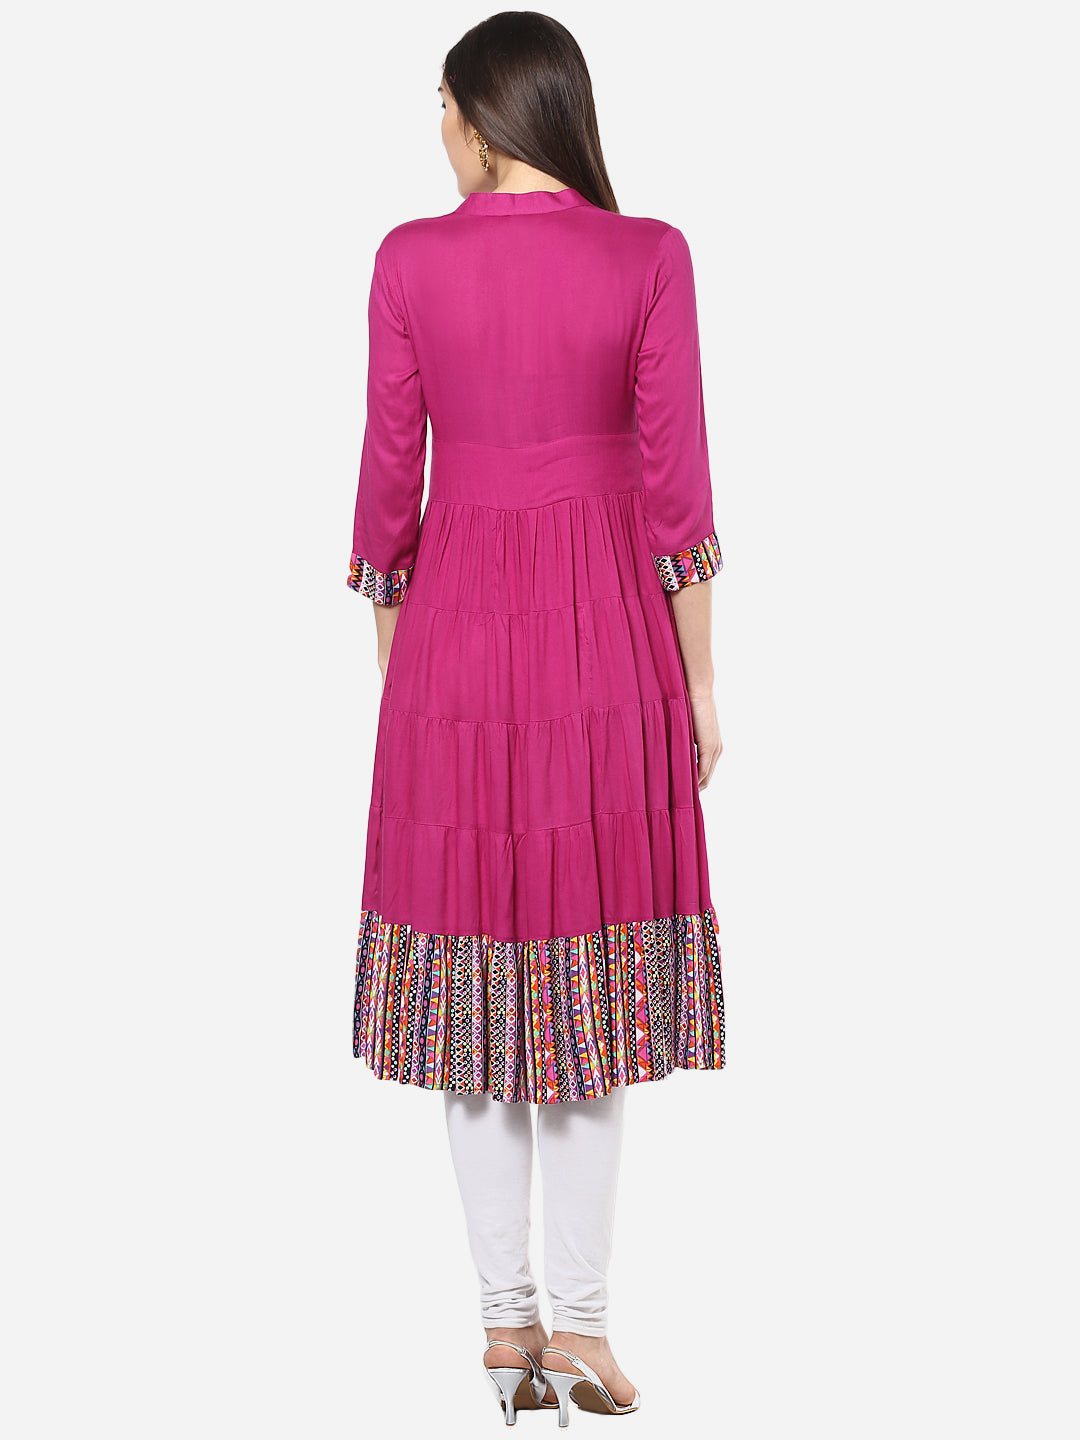 Women's Pink and Multi color tiered Anarkali Kurti